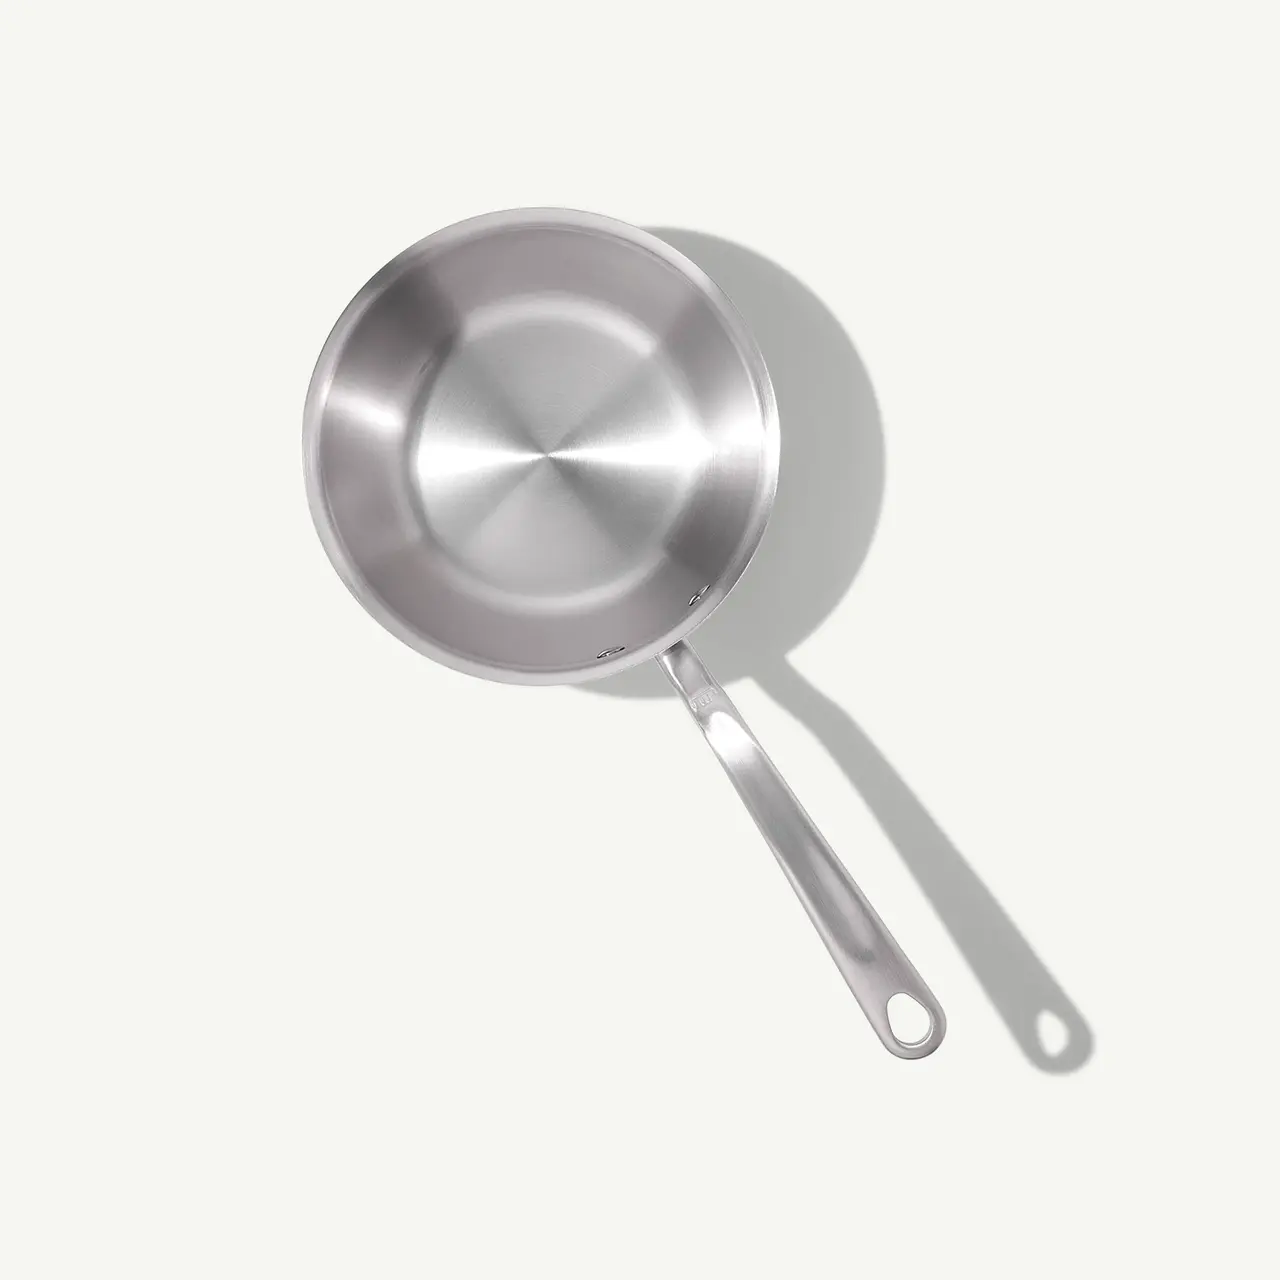 A stainless steel frying pan with a long handle is depicted against a light background.